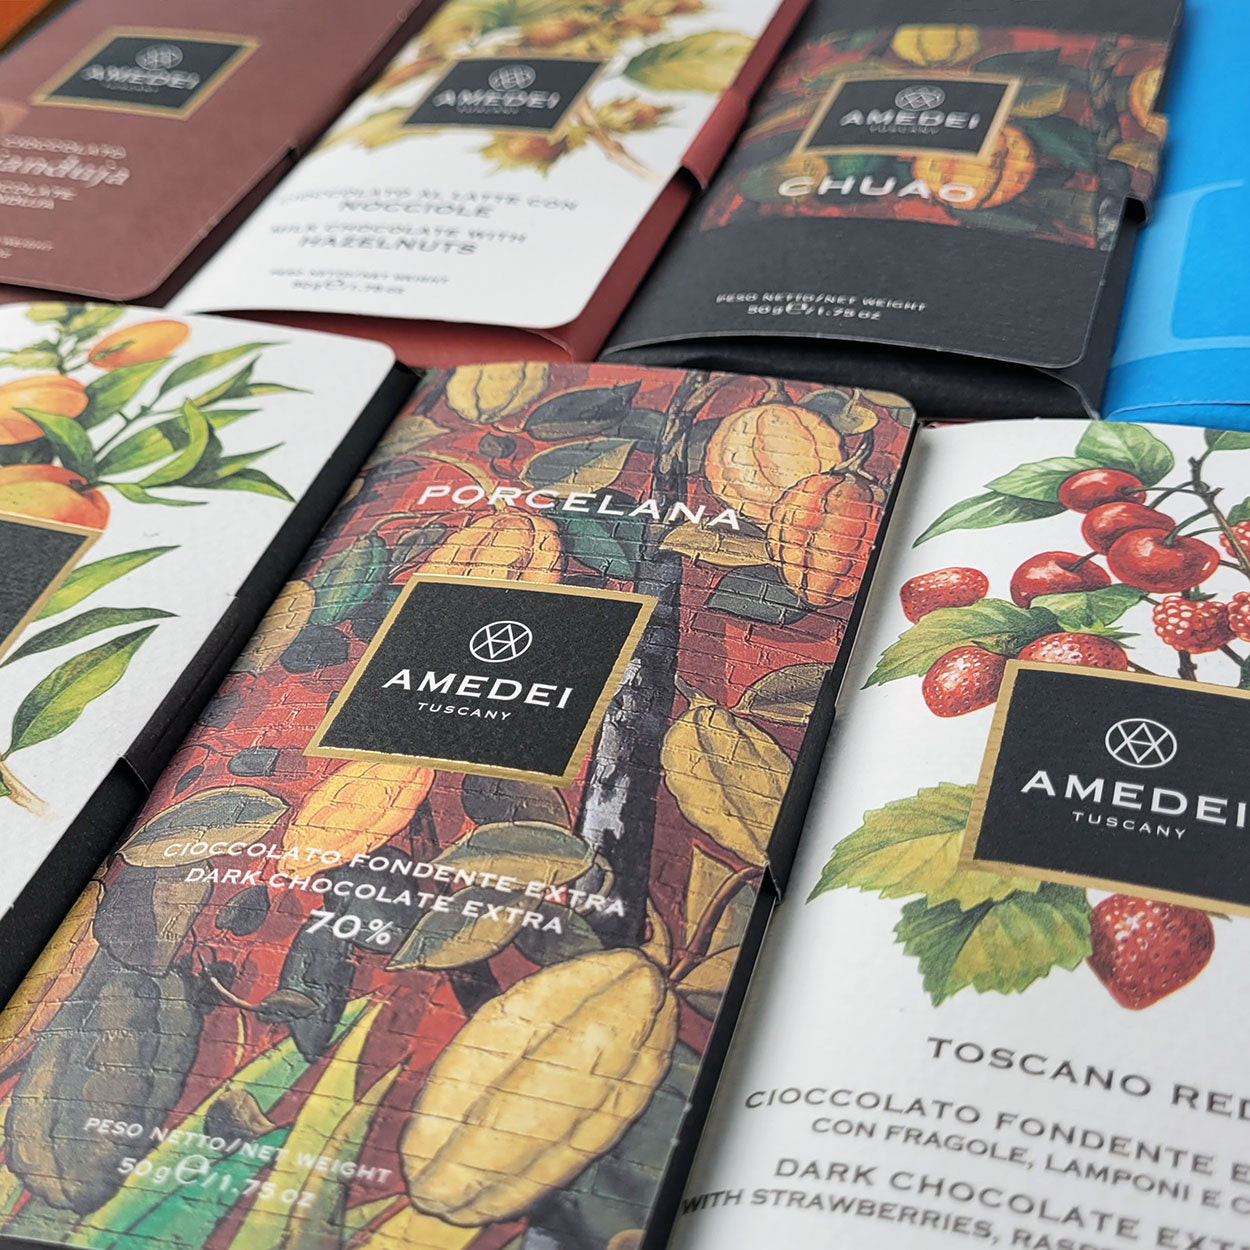 Amedei Tuscany Chocolate for sale in Canada